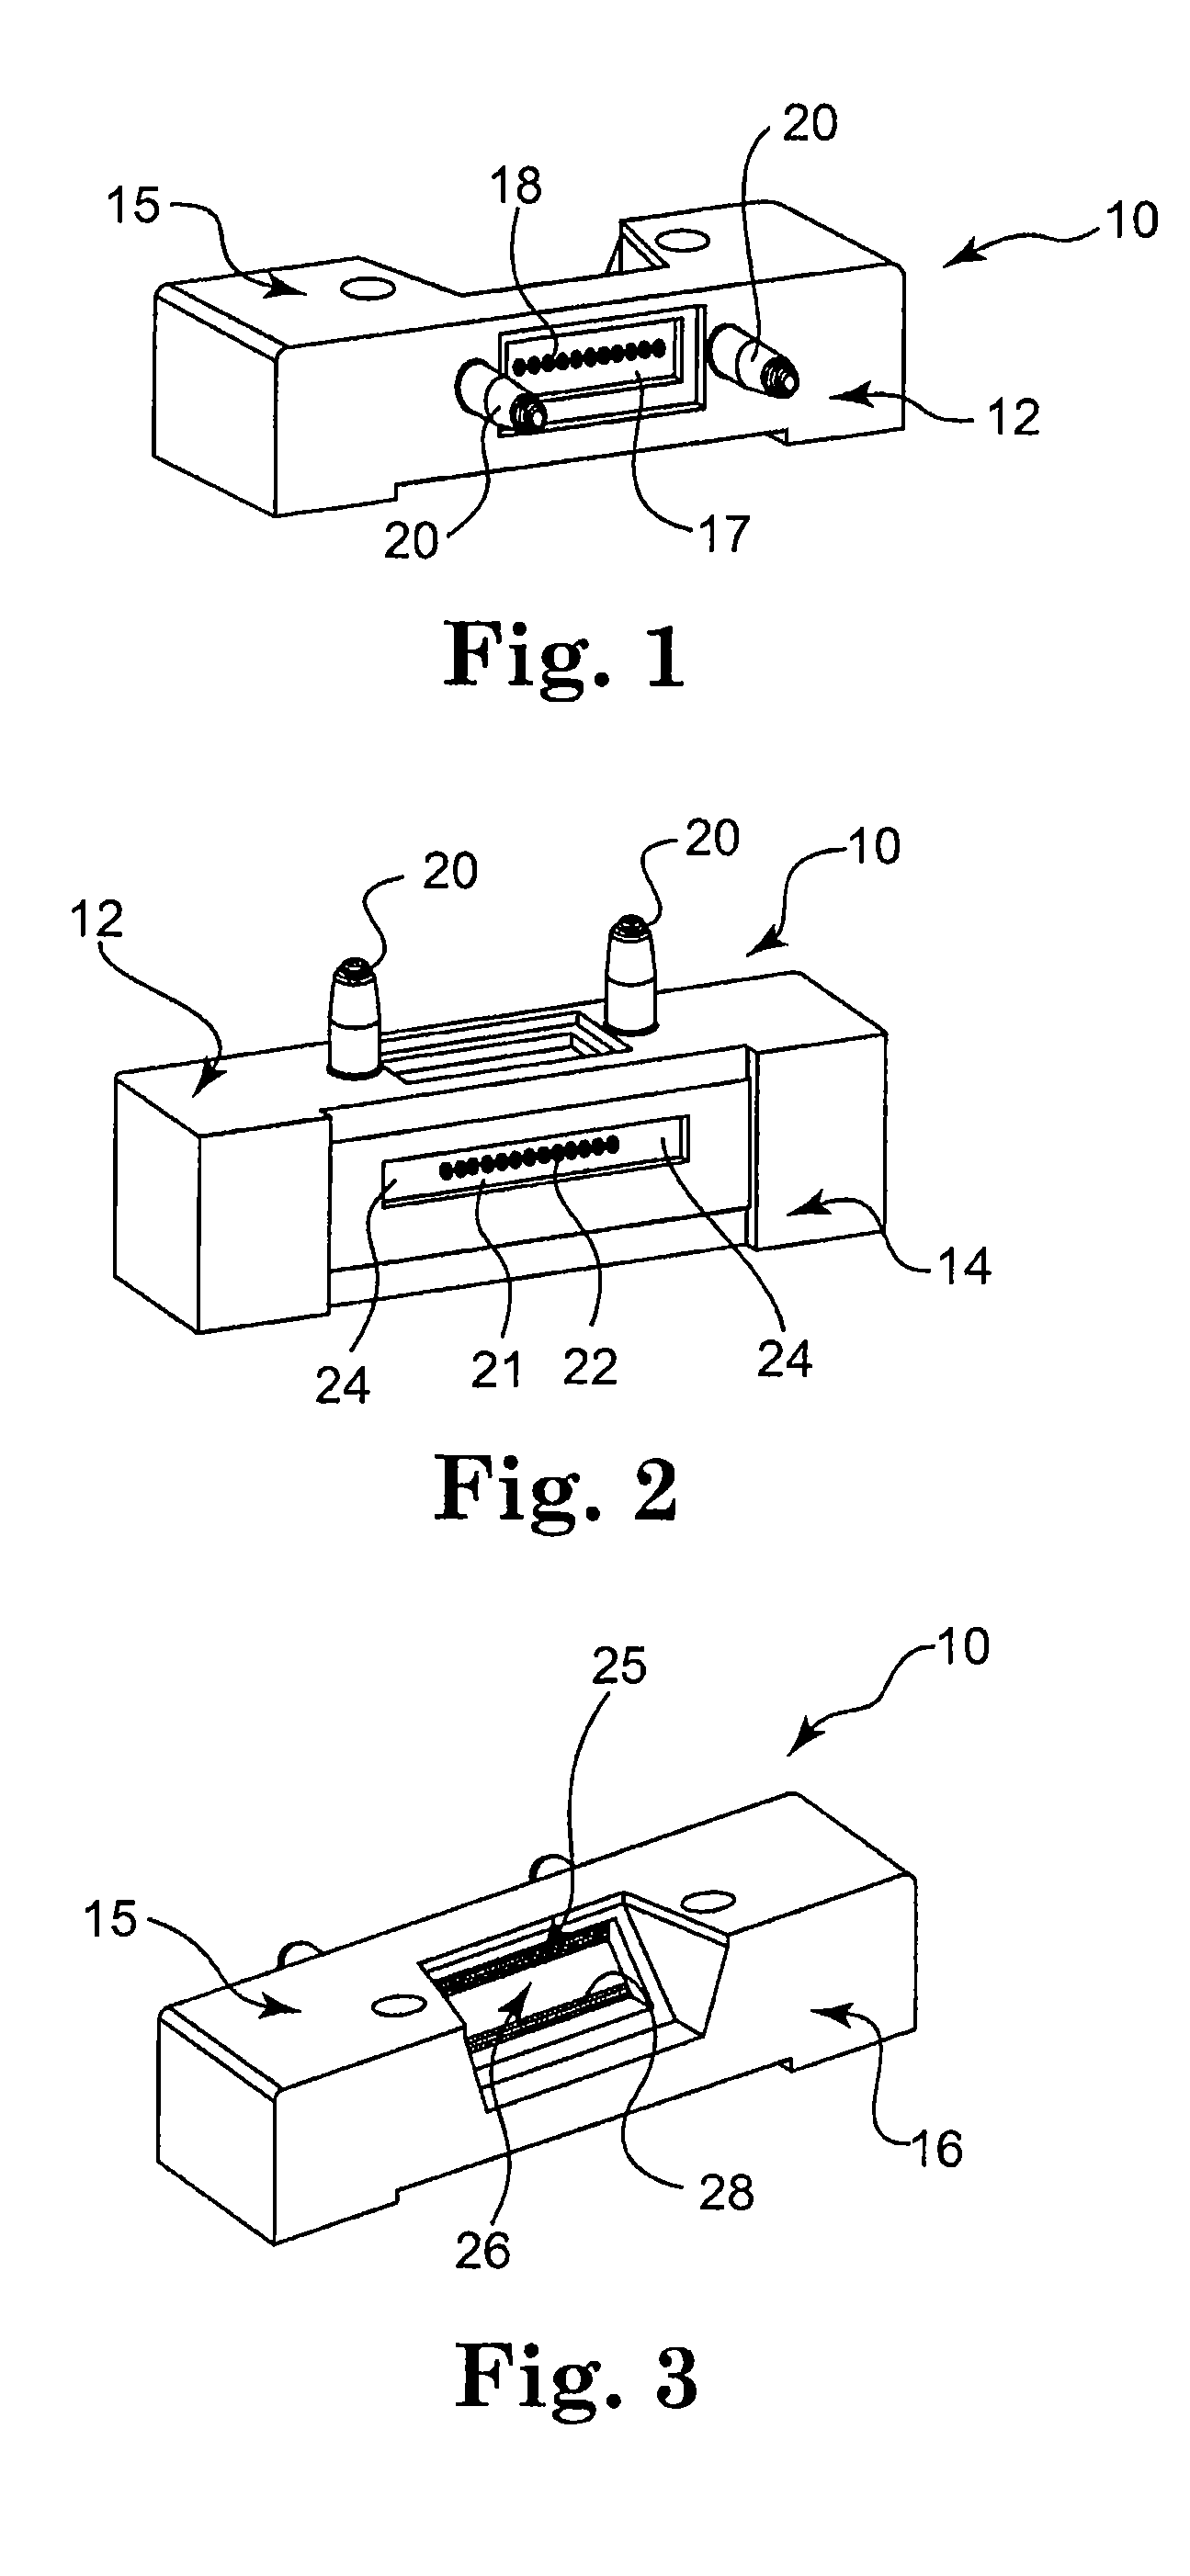 Lens array with integrated folding mirror